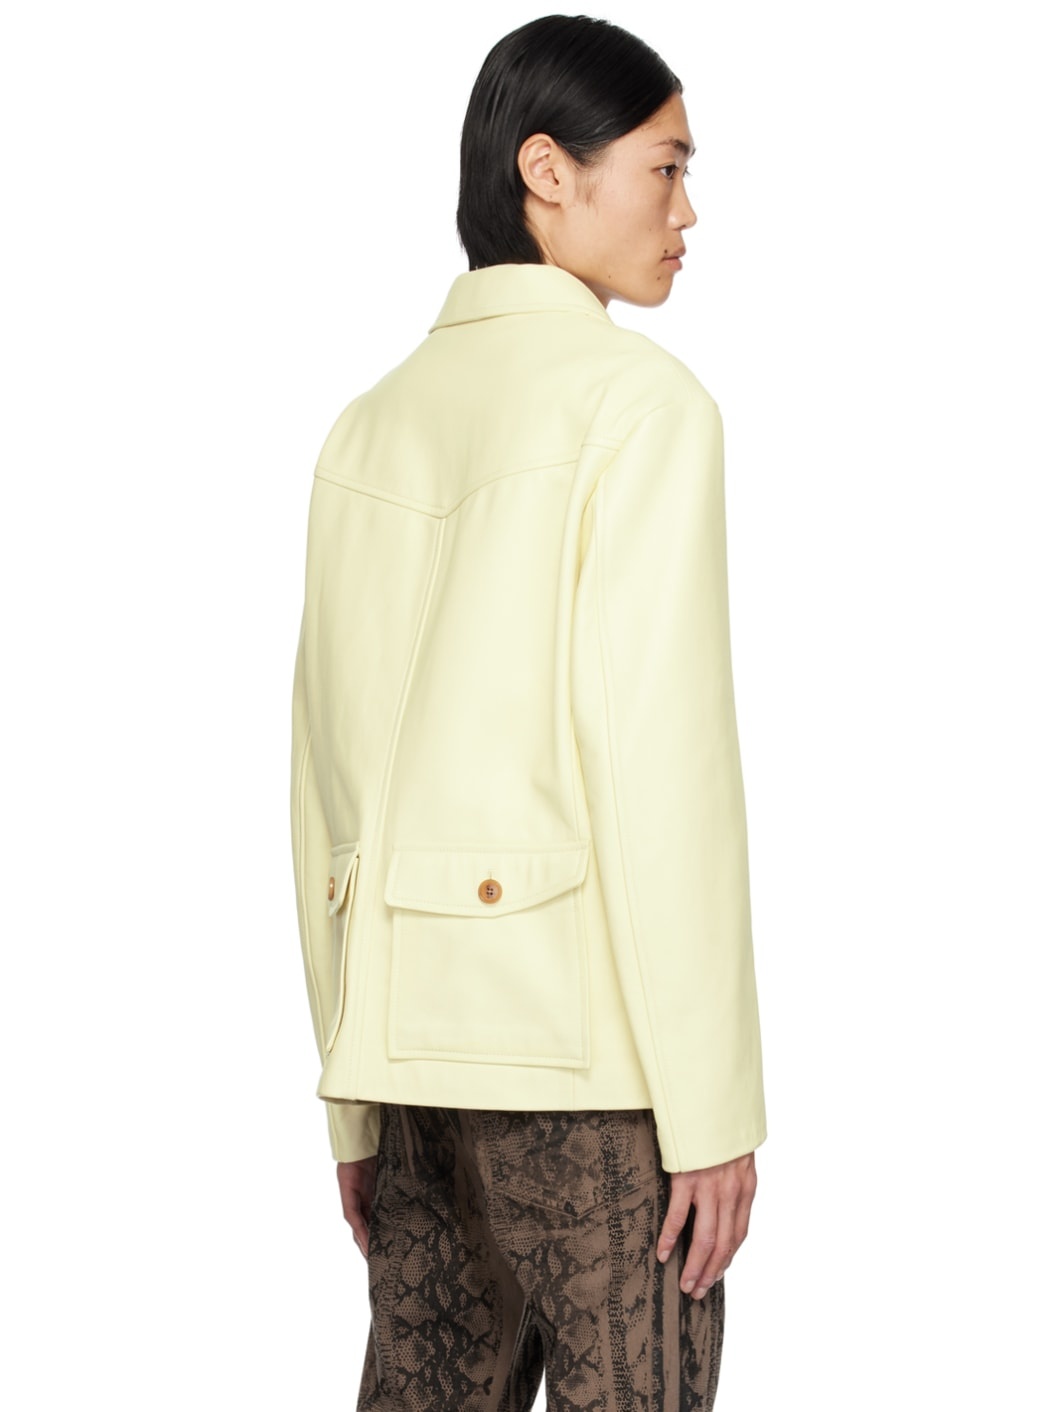 Paul Smith Yellow Commission Leather Jacket